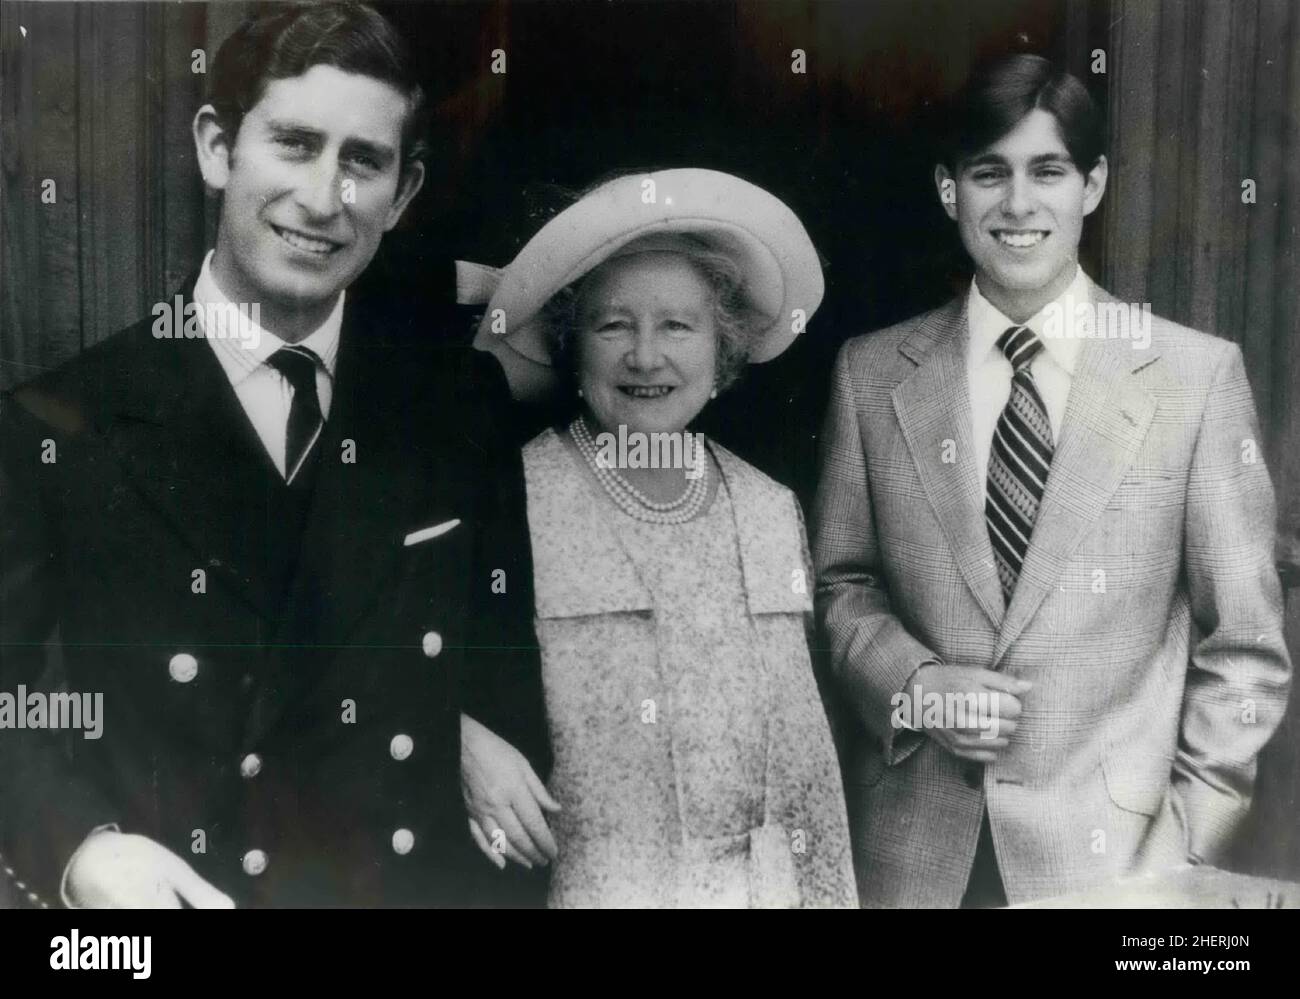 Aug. 1975 - London, England, United Kingdom - Her Majesty the QUEEN MOTHER will celebrate her seventy-fifth birthday. The Queen Mother at Windsor, with two of her grandsons, HRH PRINCE CHARLES, left, and HRH PRINCE ANDREW. Credit: Keystone Press Agency/ZUMA Wire/Alamy Live News Stock Photo